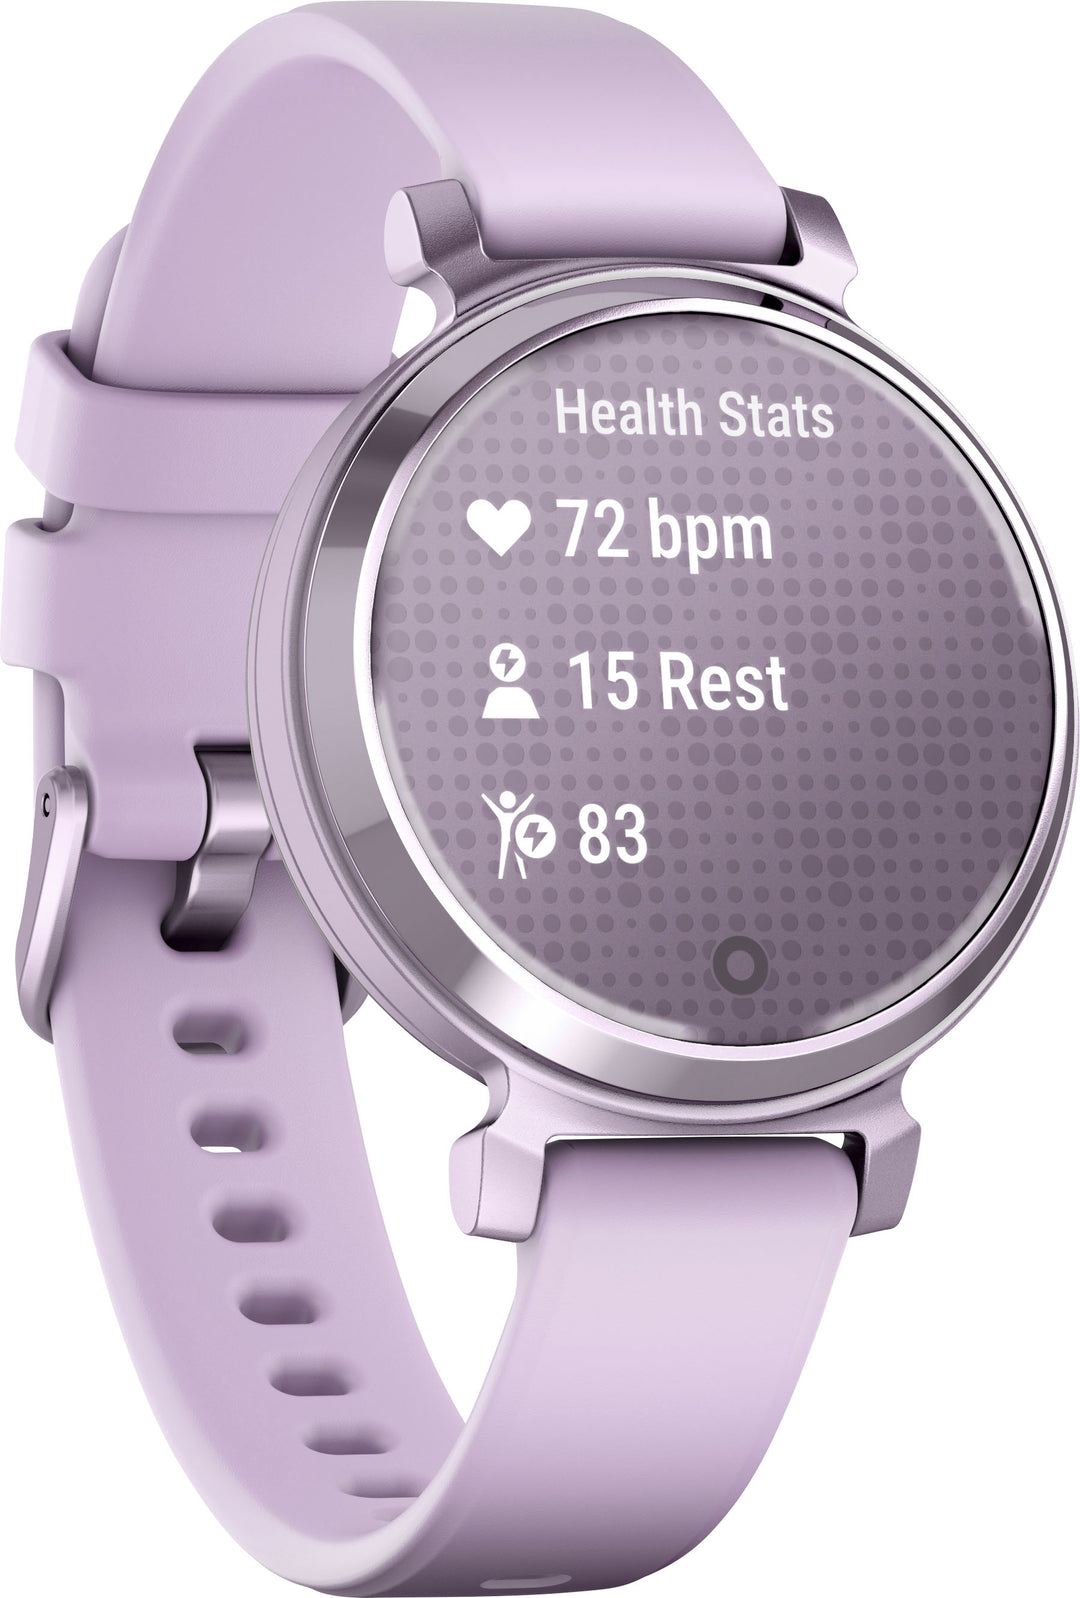 Garmin - Lily 2 Smartwatch 34 mm Anodized Aluminum - Metallic Lilac with Lilac Silicone Band_2